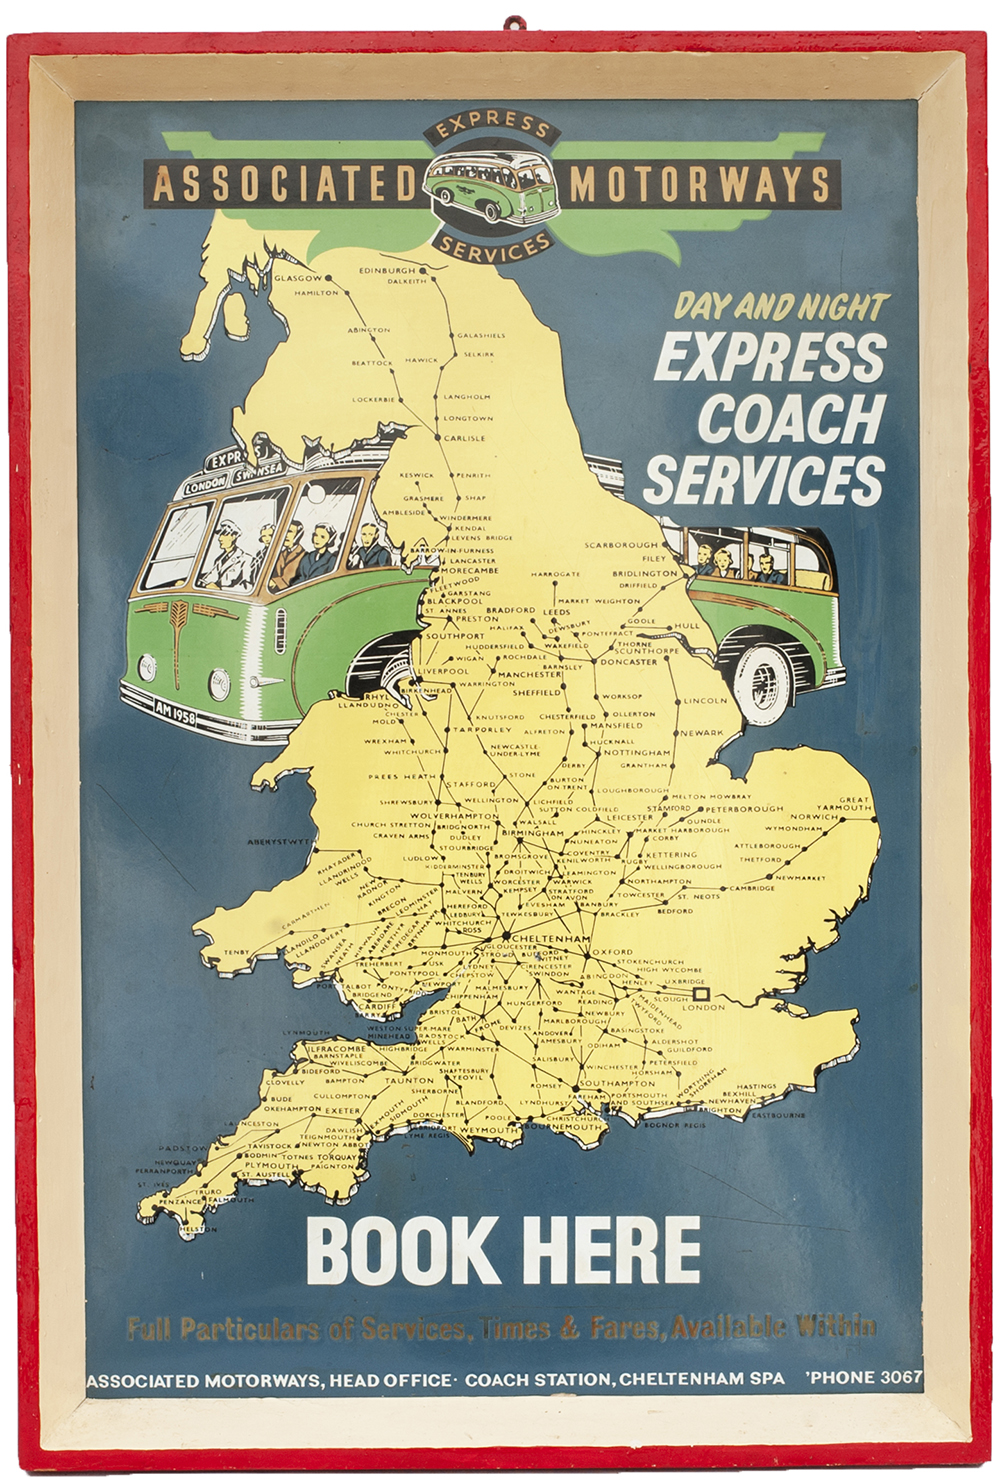 Bus motoring enamel sign ASSOCIATED MOTORWAYS DAY AND NIGHT EXPRESS COACH SERVICES. BOOK HERE